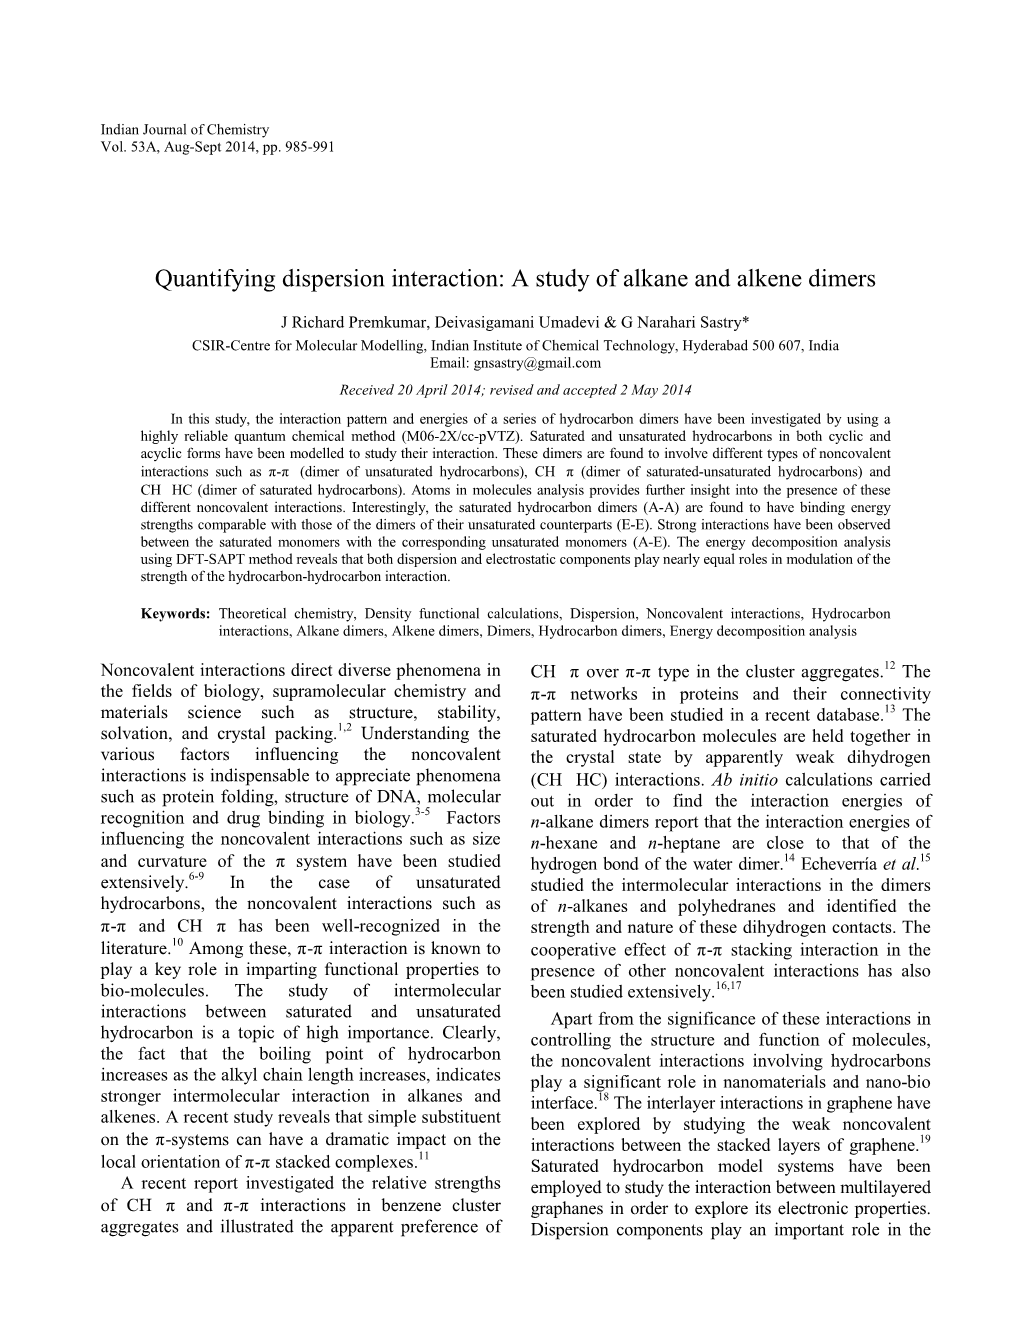 Quantifying Dispersion Interaction: a Study of Alkane and Alkene Dimers